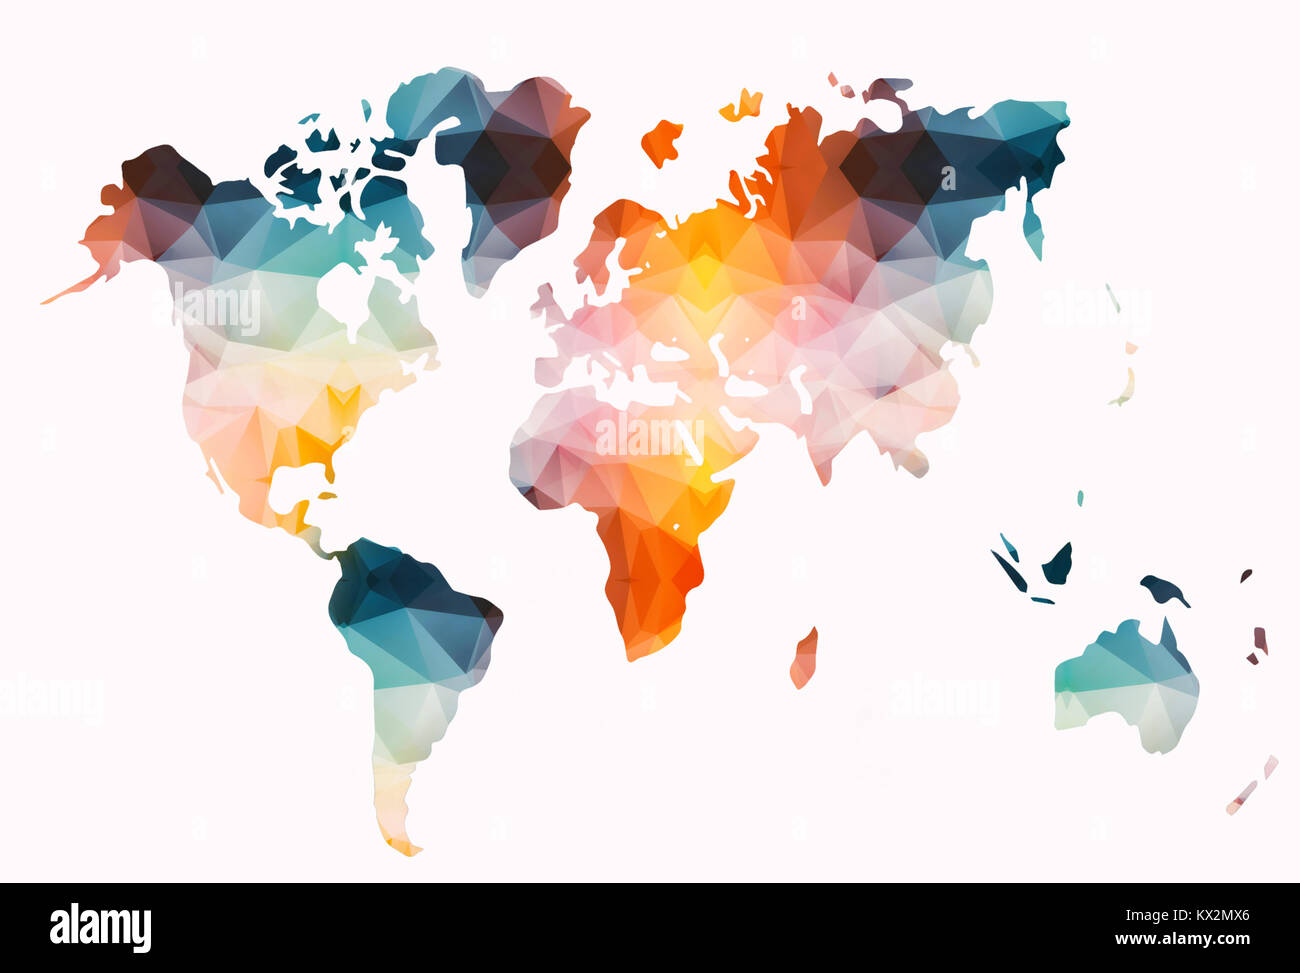 Low poly colorful world map Stock Photo